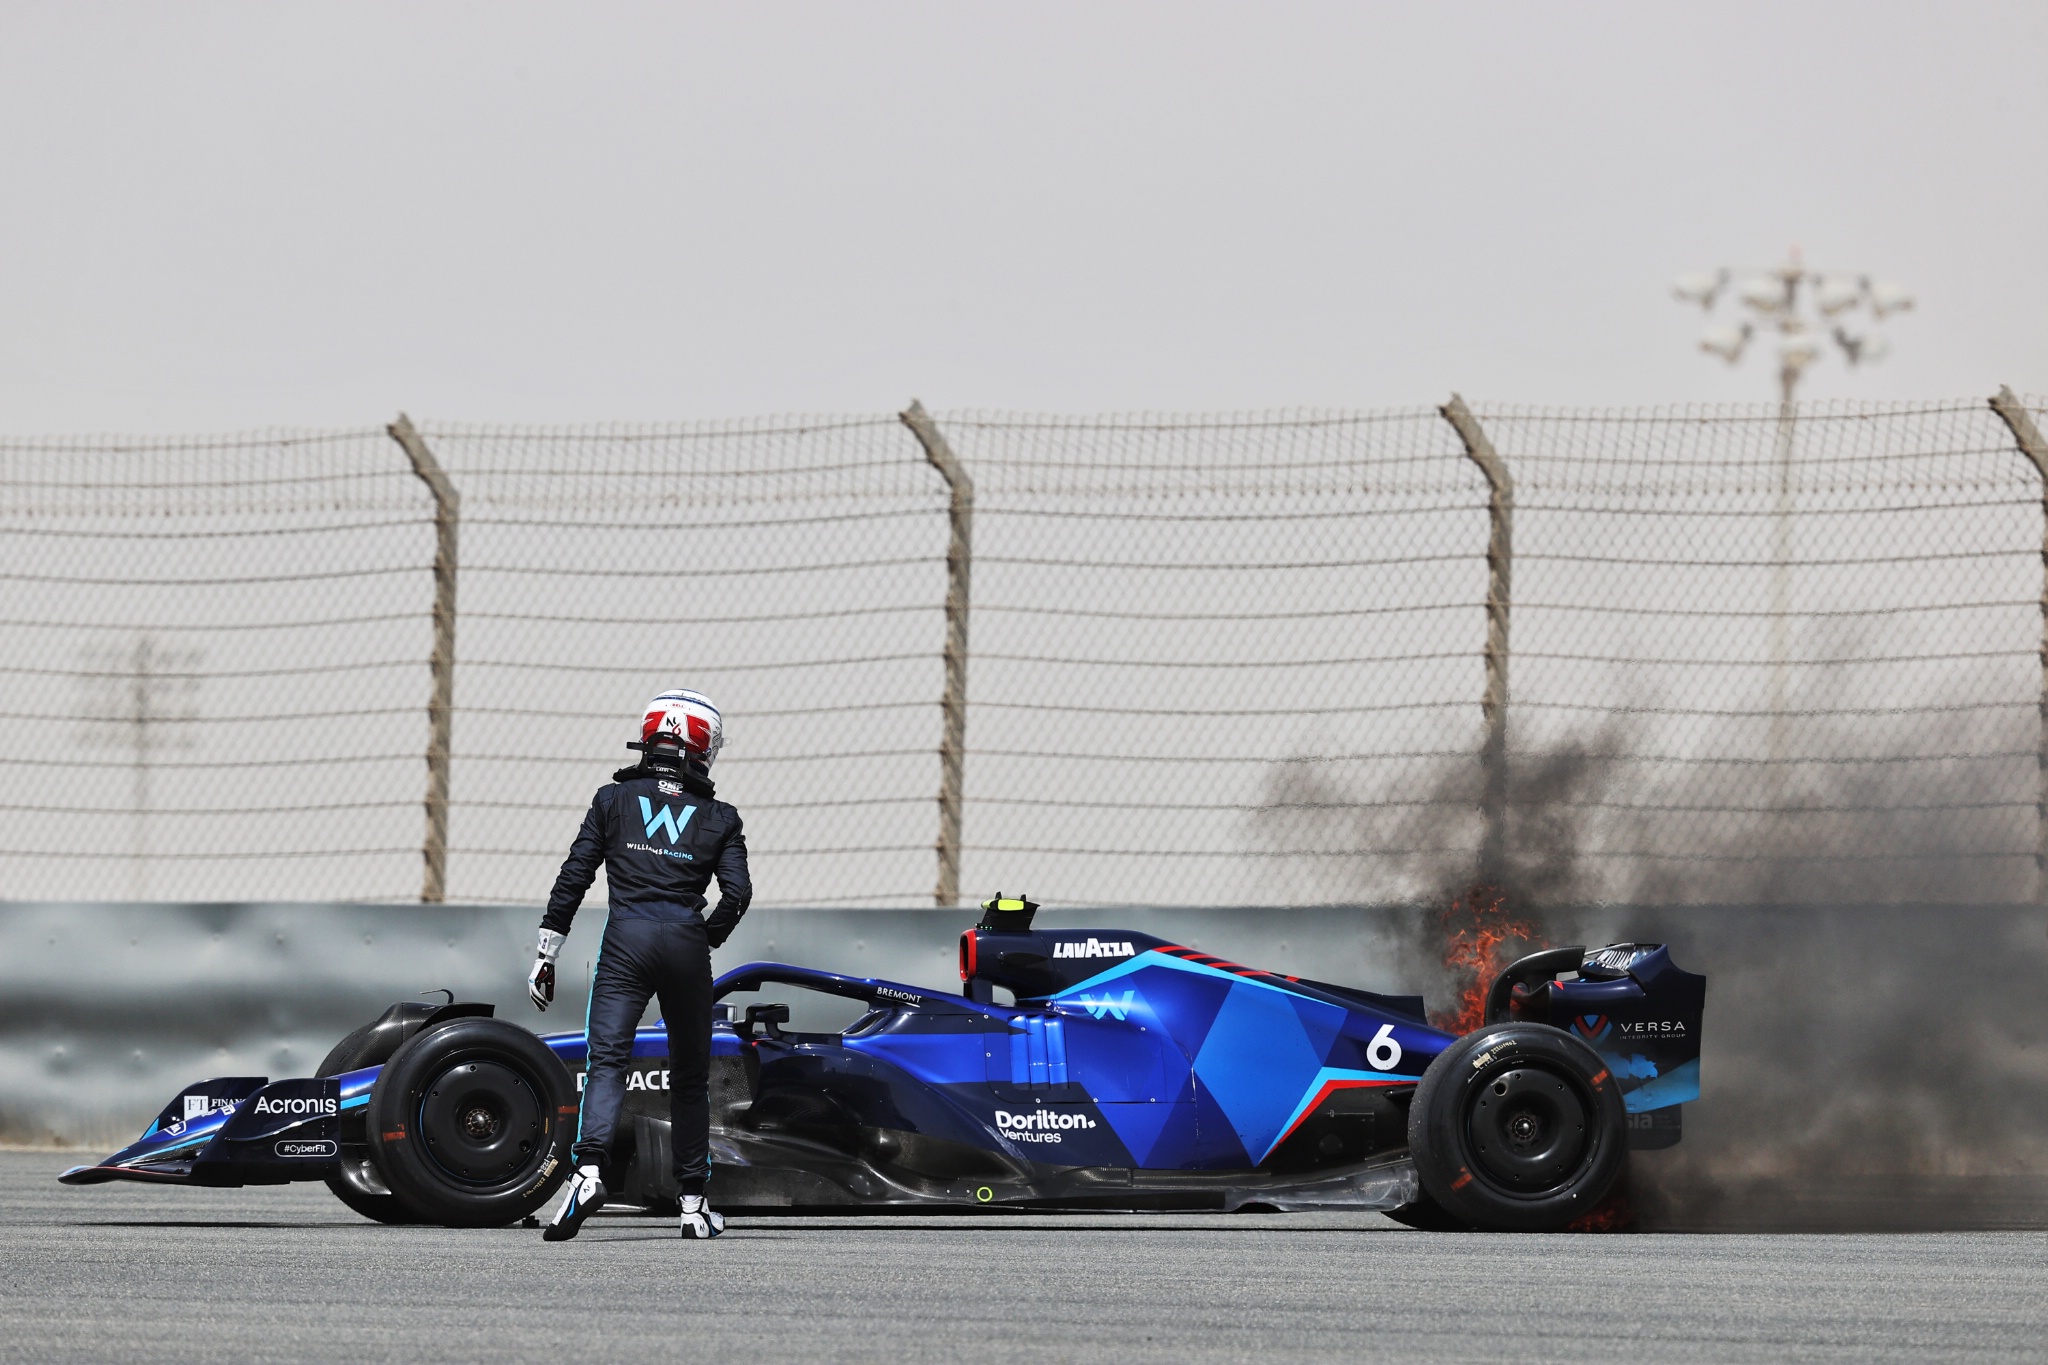 Nicholas Latifi (CDN) Williams Racing FW44 stopped on the circuit with the rear brakes on fire.